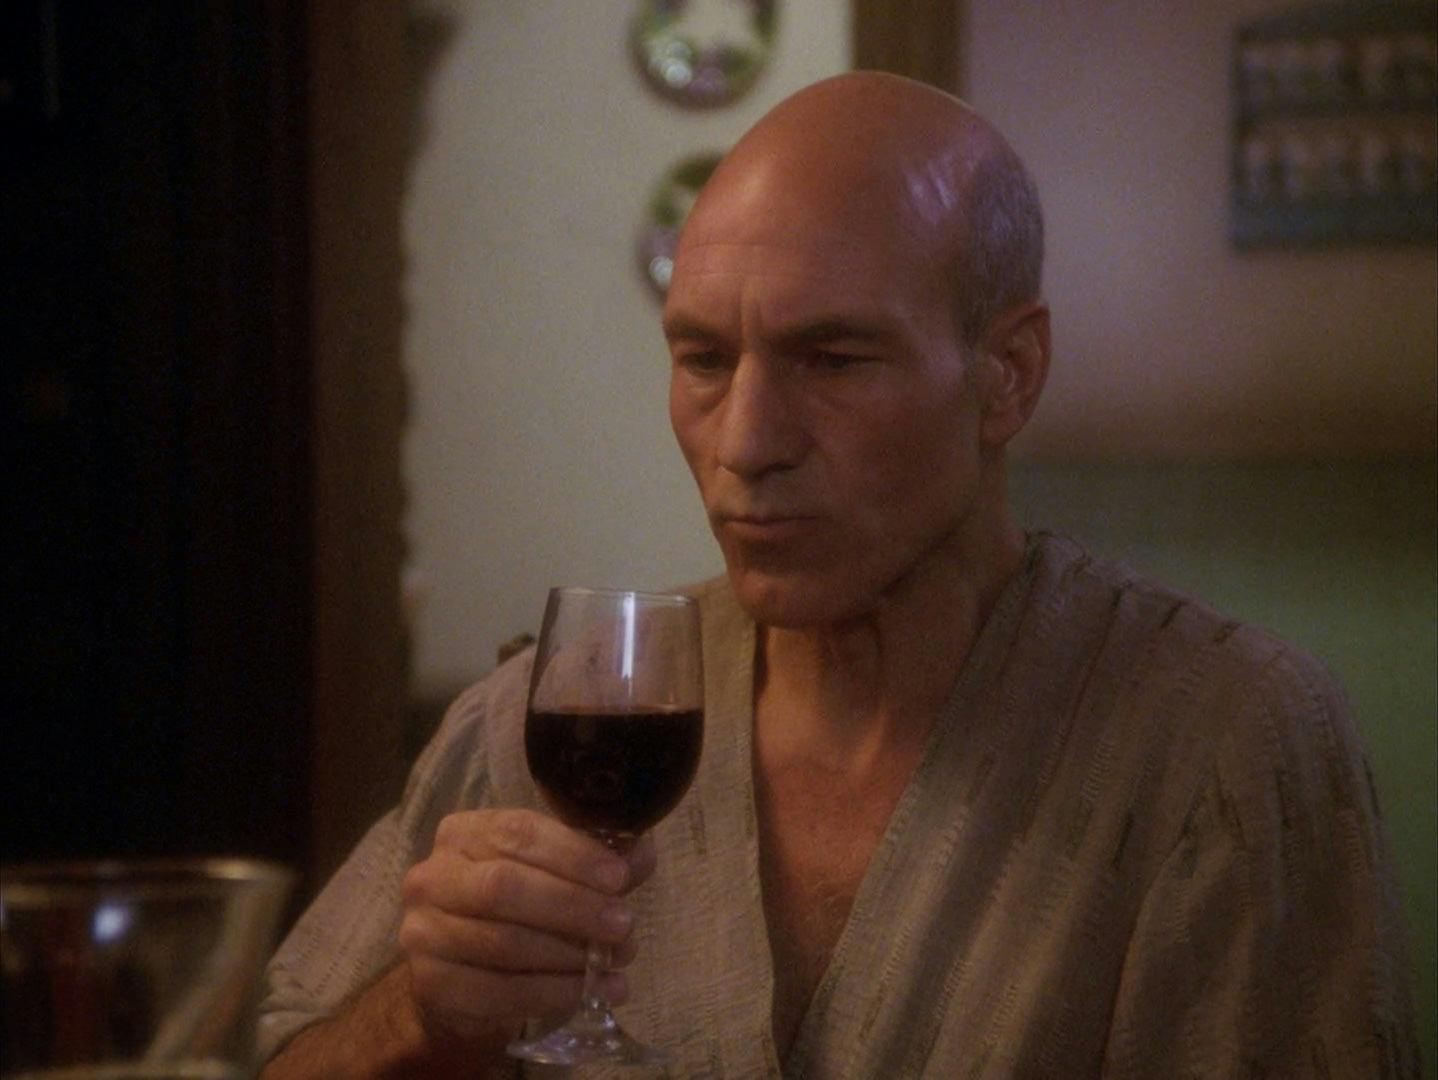 With a sip, Jean-Luc assesses a glass of Chateau Picard wine at the dinner table in 'Family'